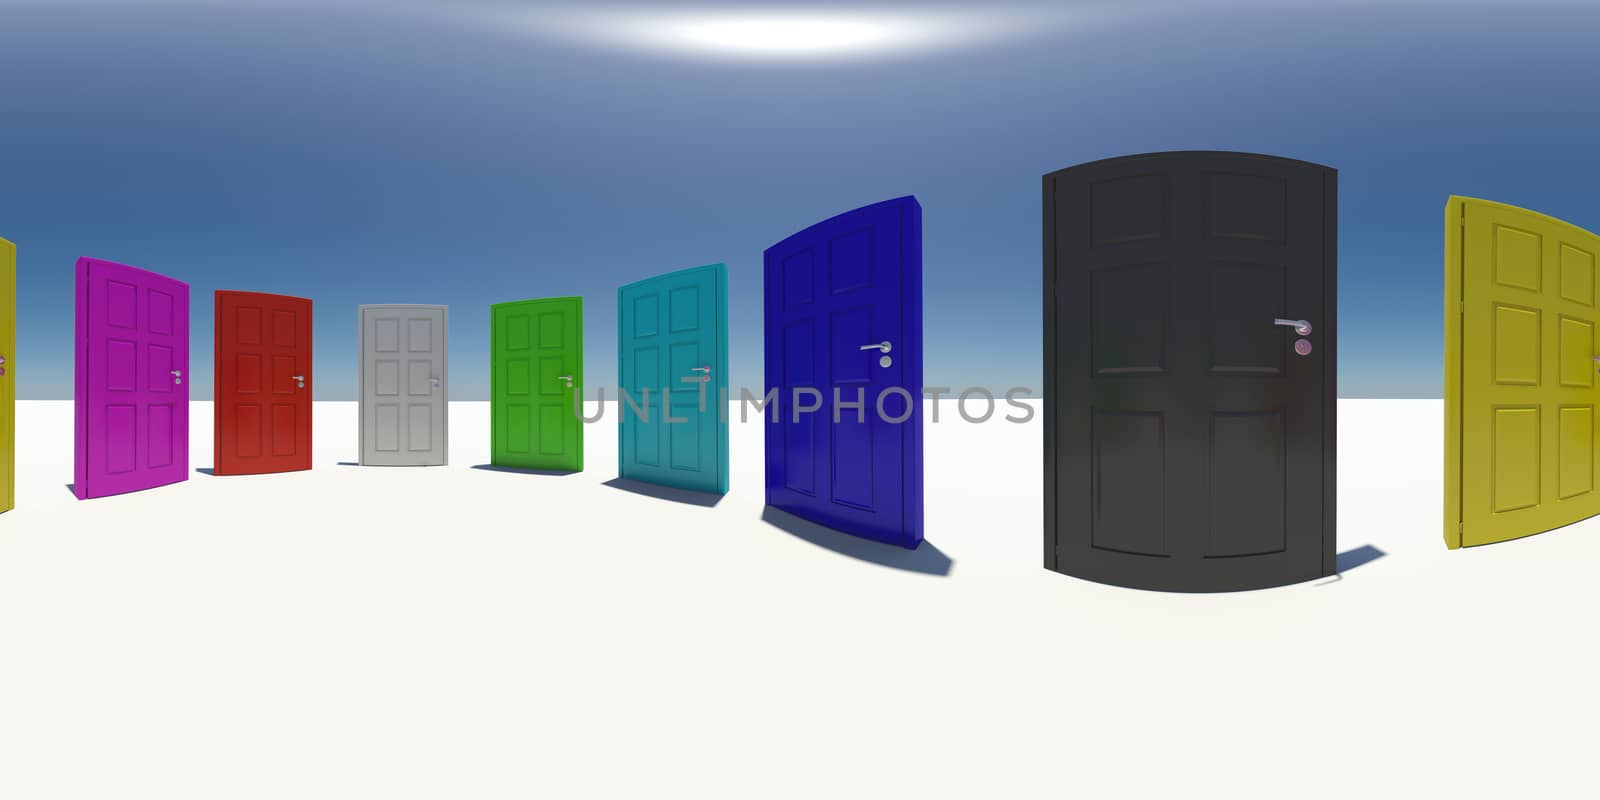 Spherical panorama of colorful doors. White surface. Blue sky as background